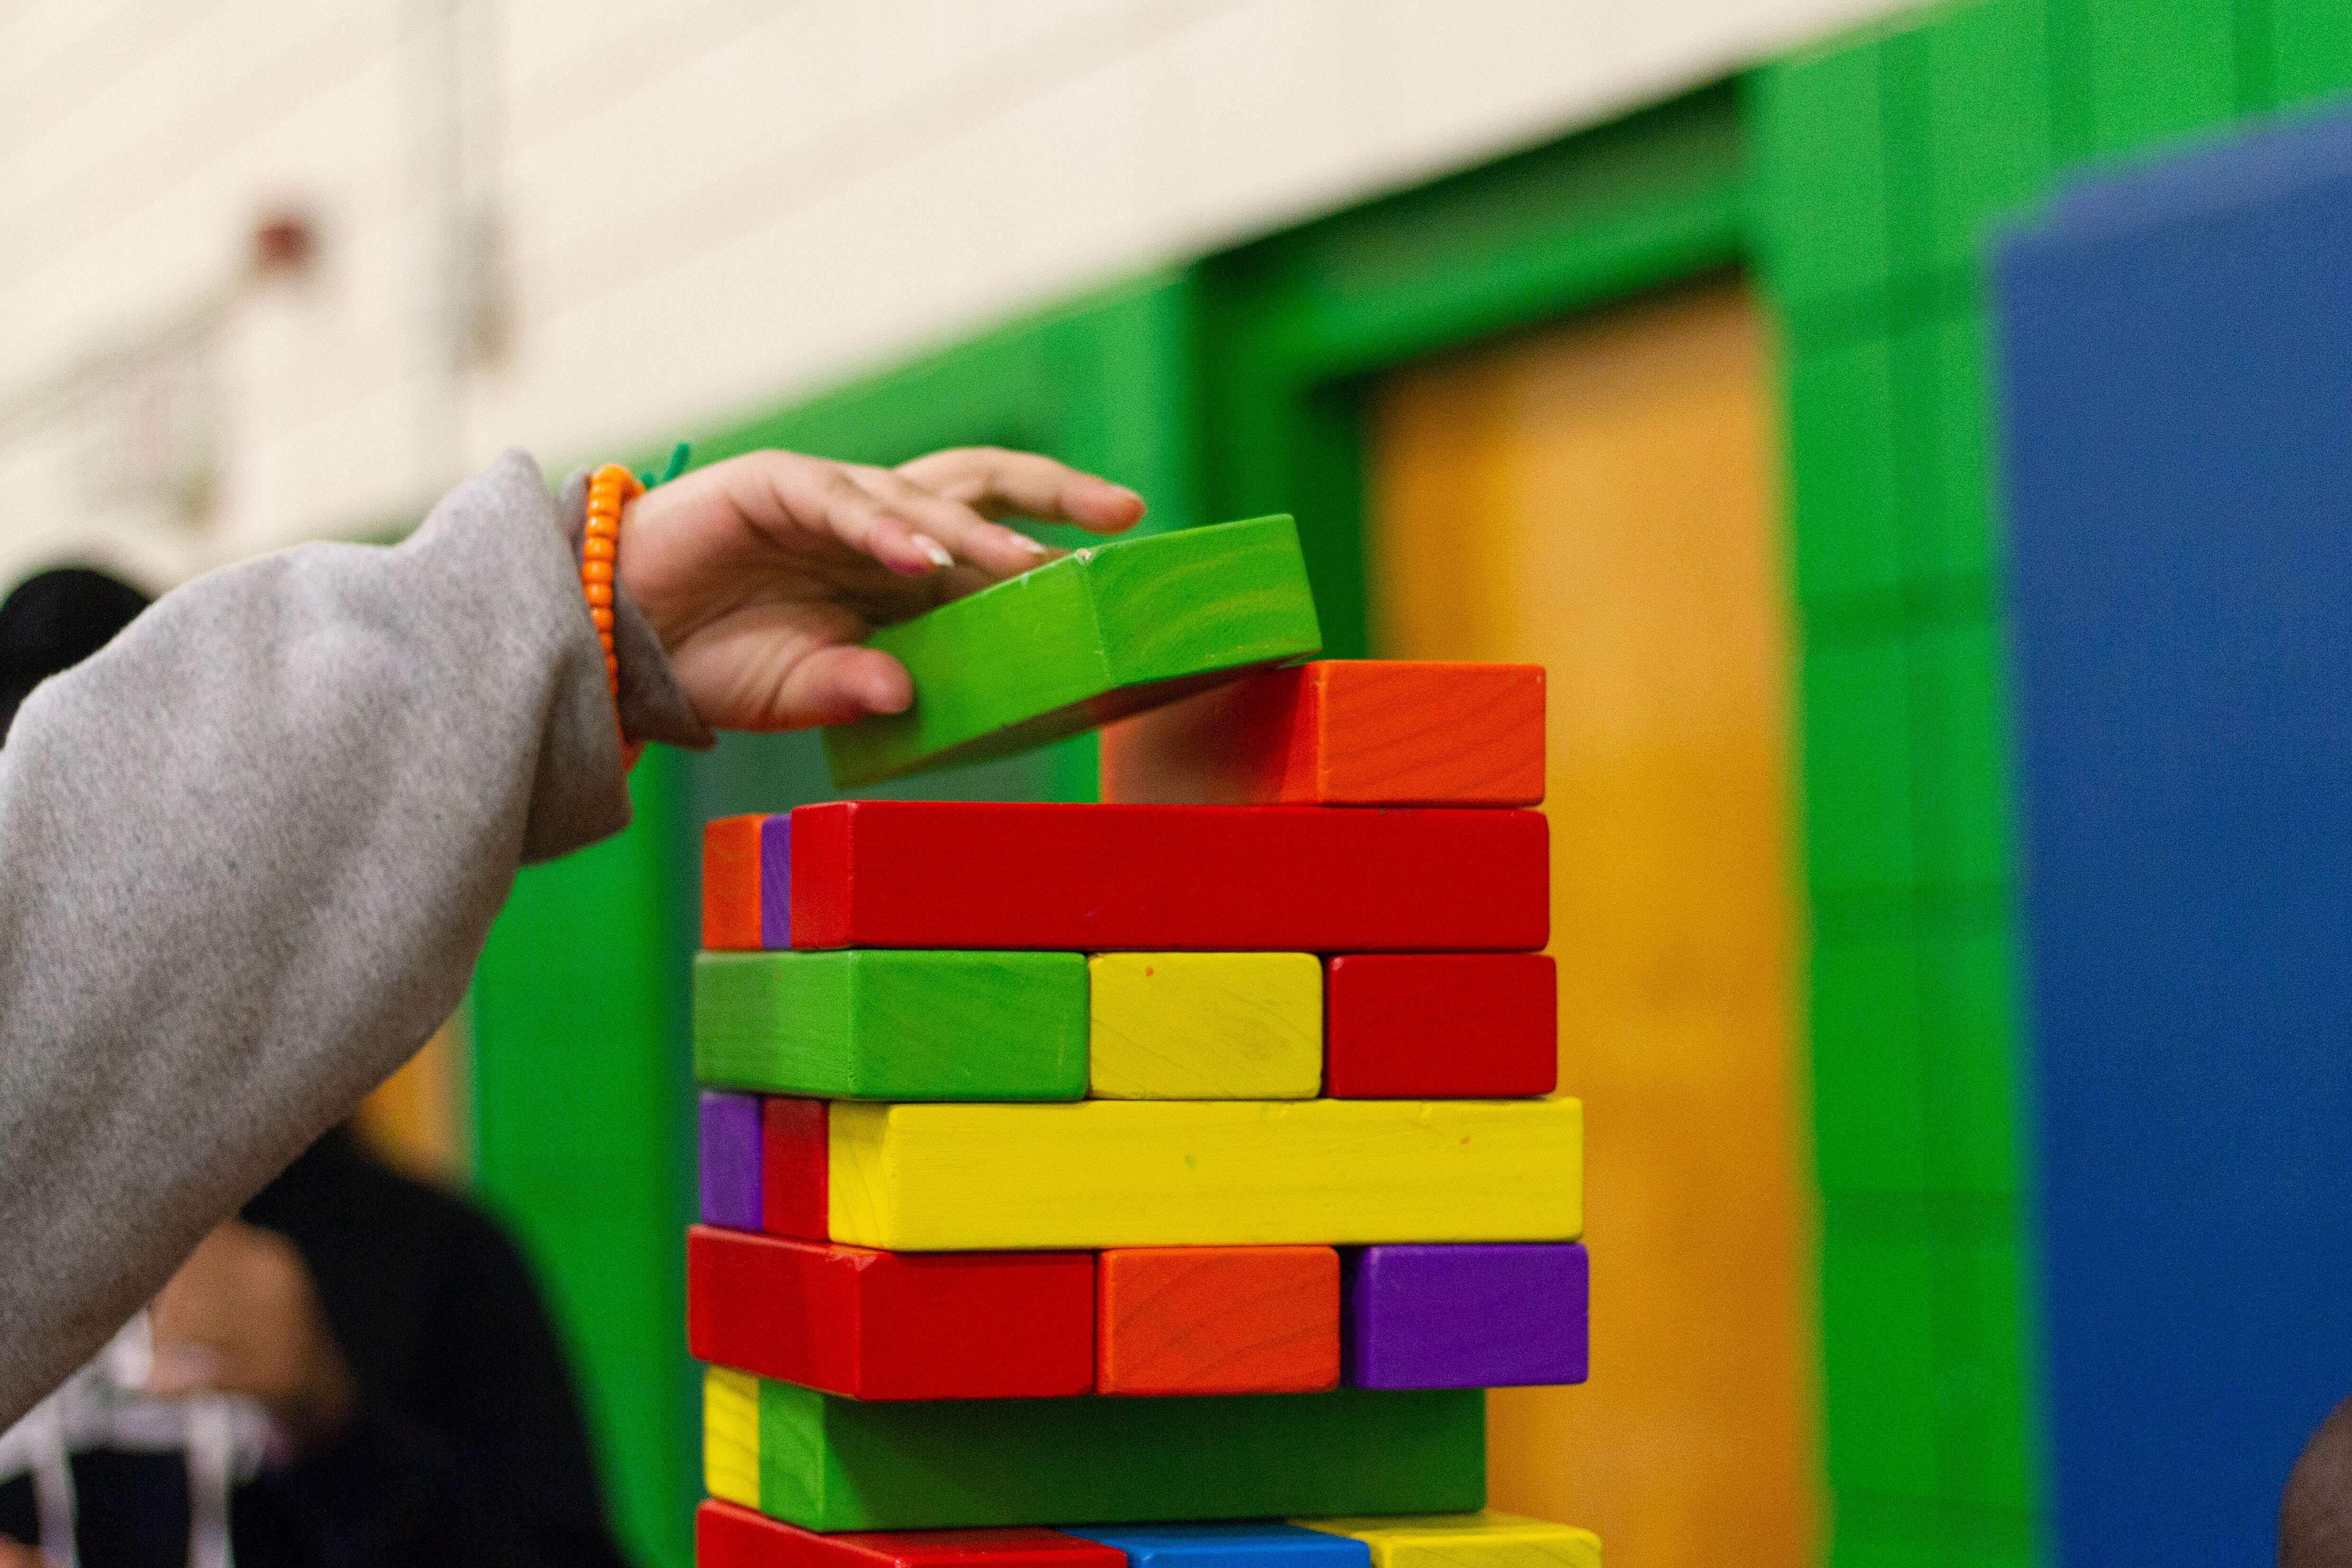 Toy tower built out of colored blocks